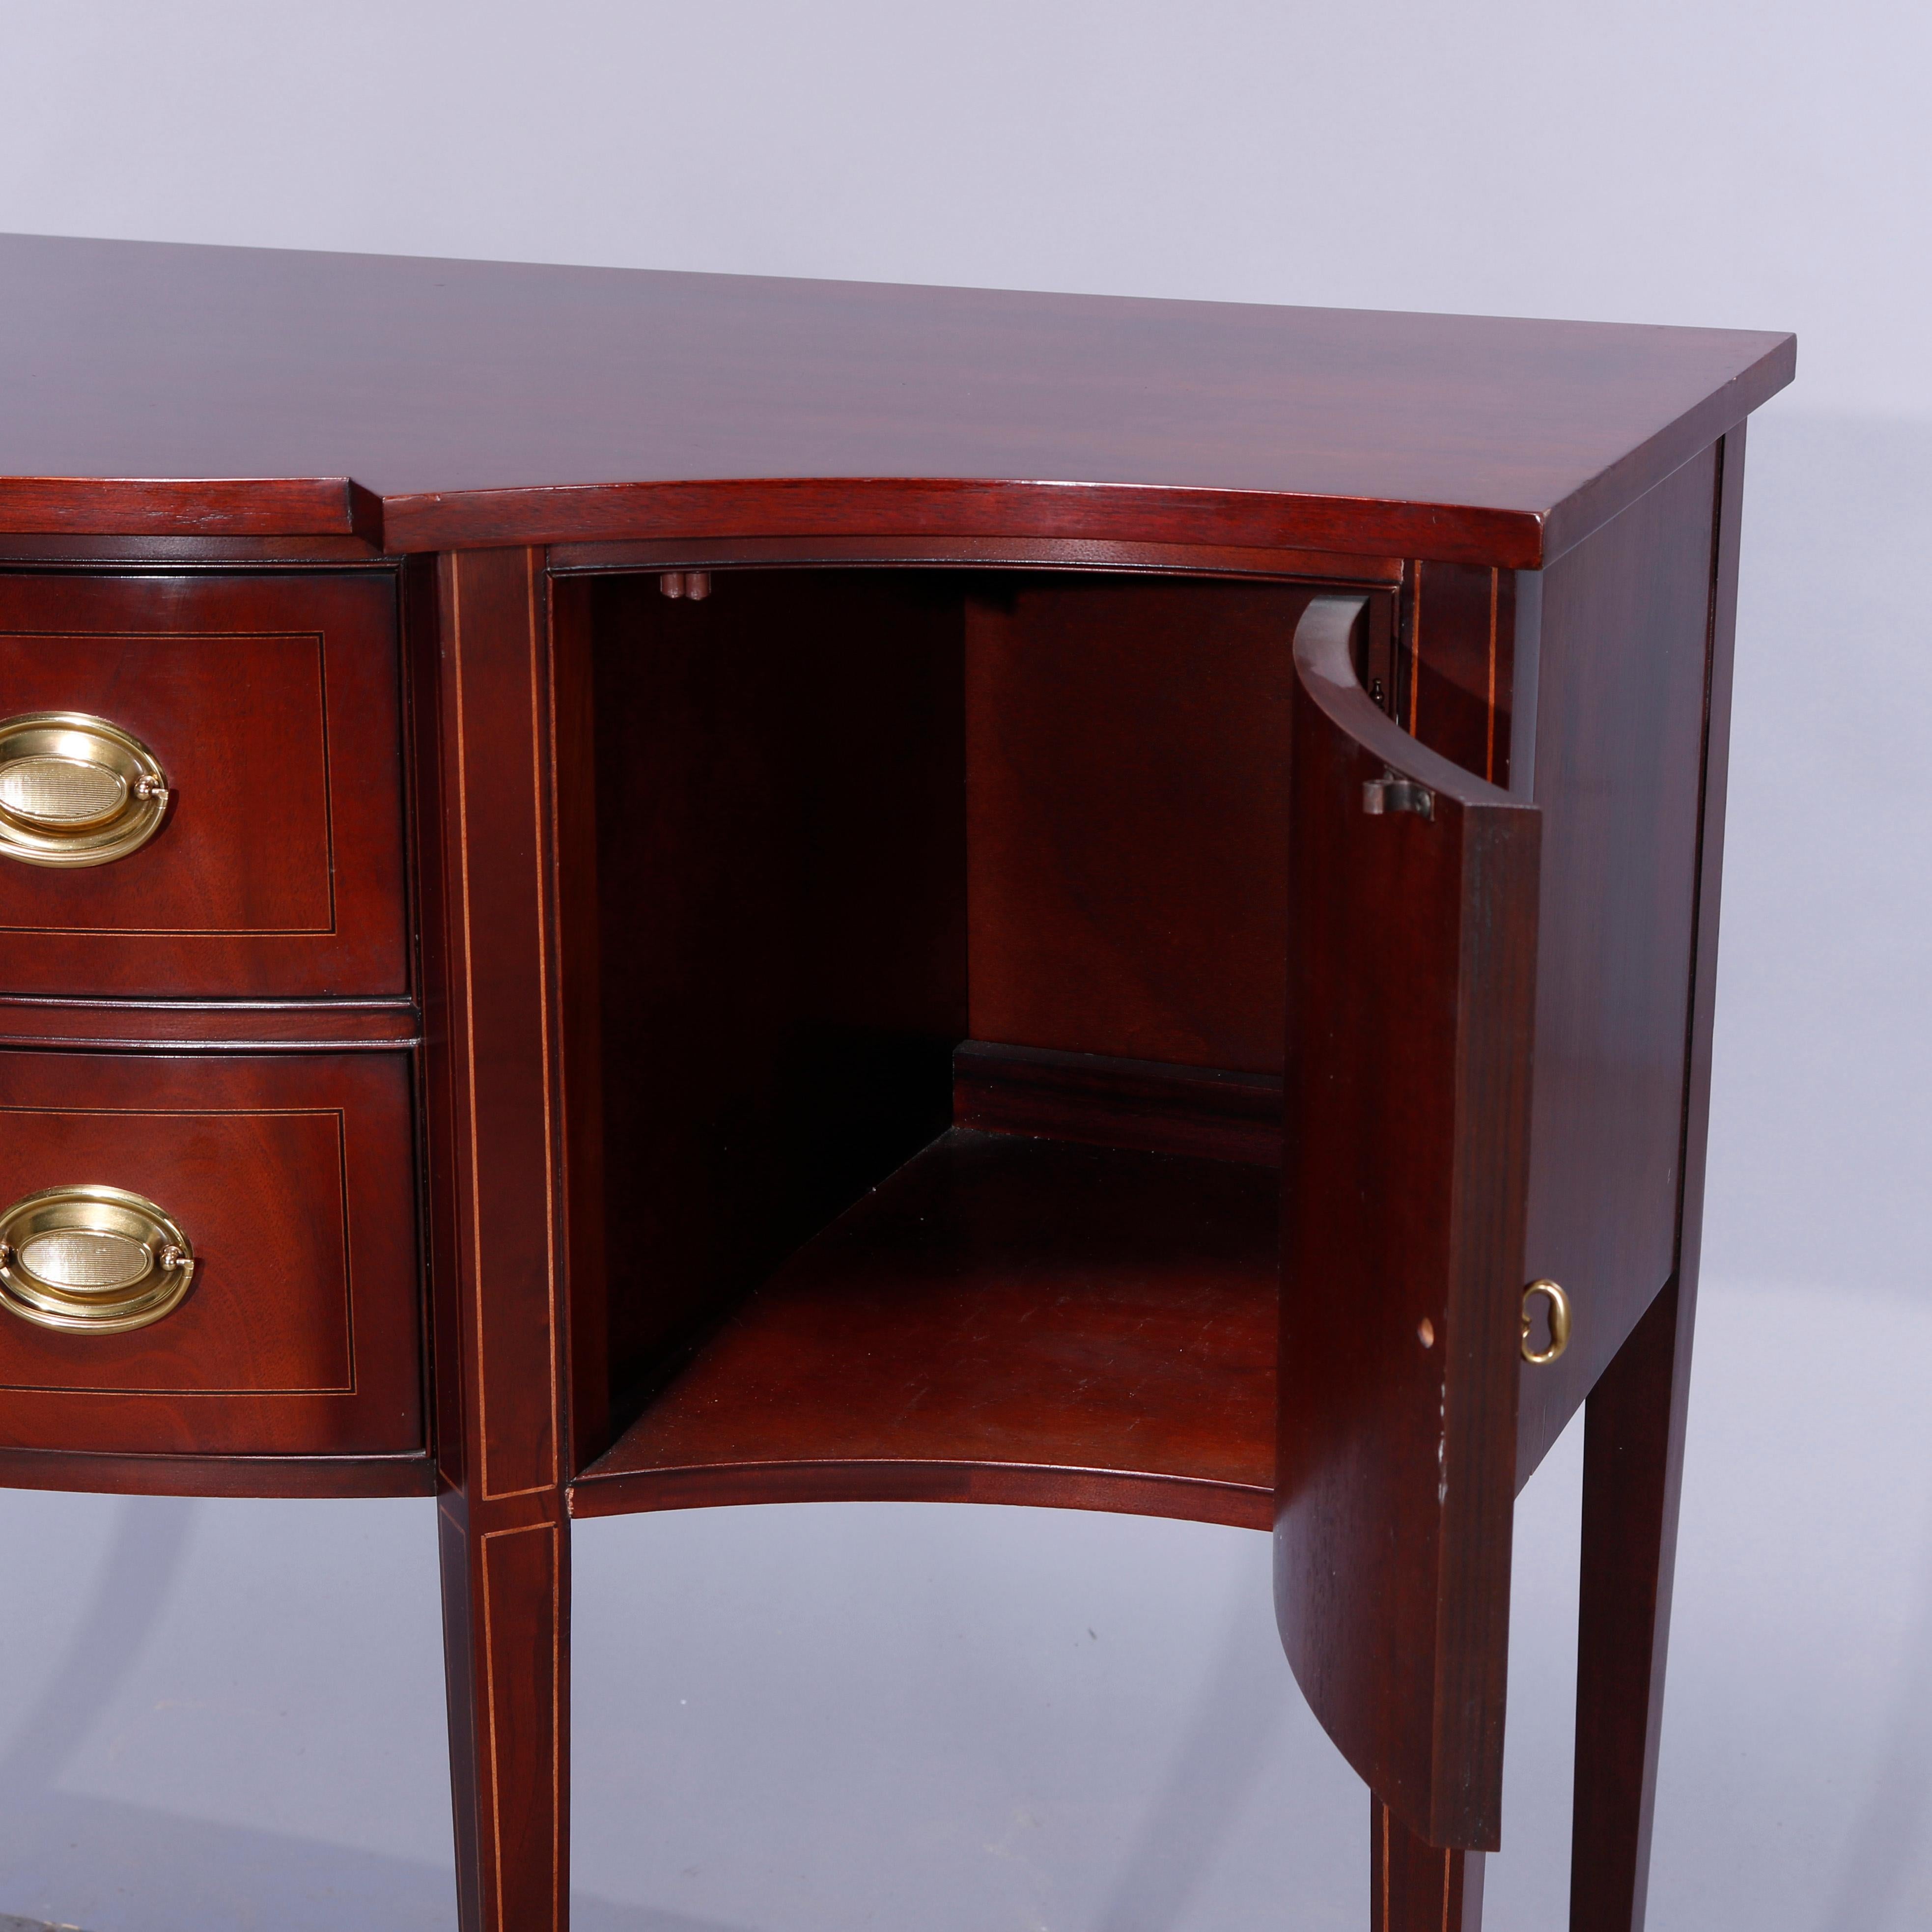 20th Century Hepplewhite Style Hickory Chair Inlaid Mahogany Silver Server Sideboard 20th C